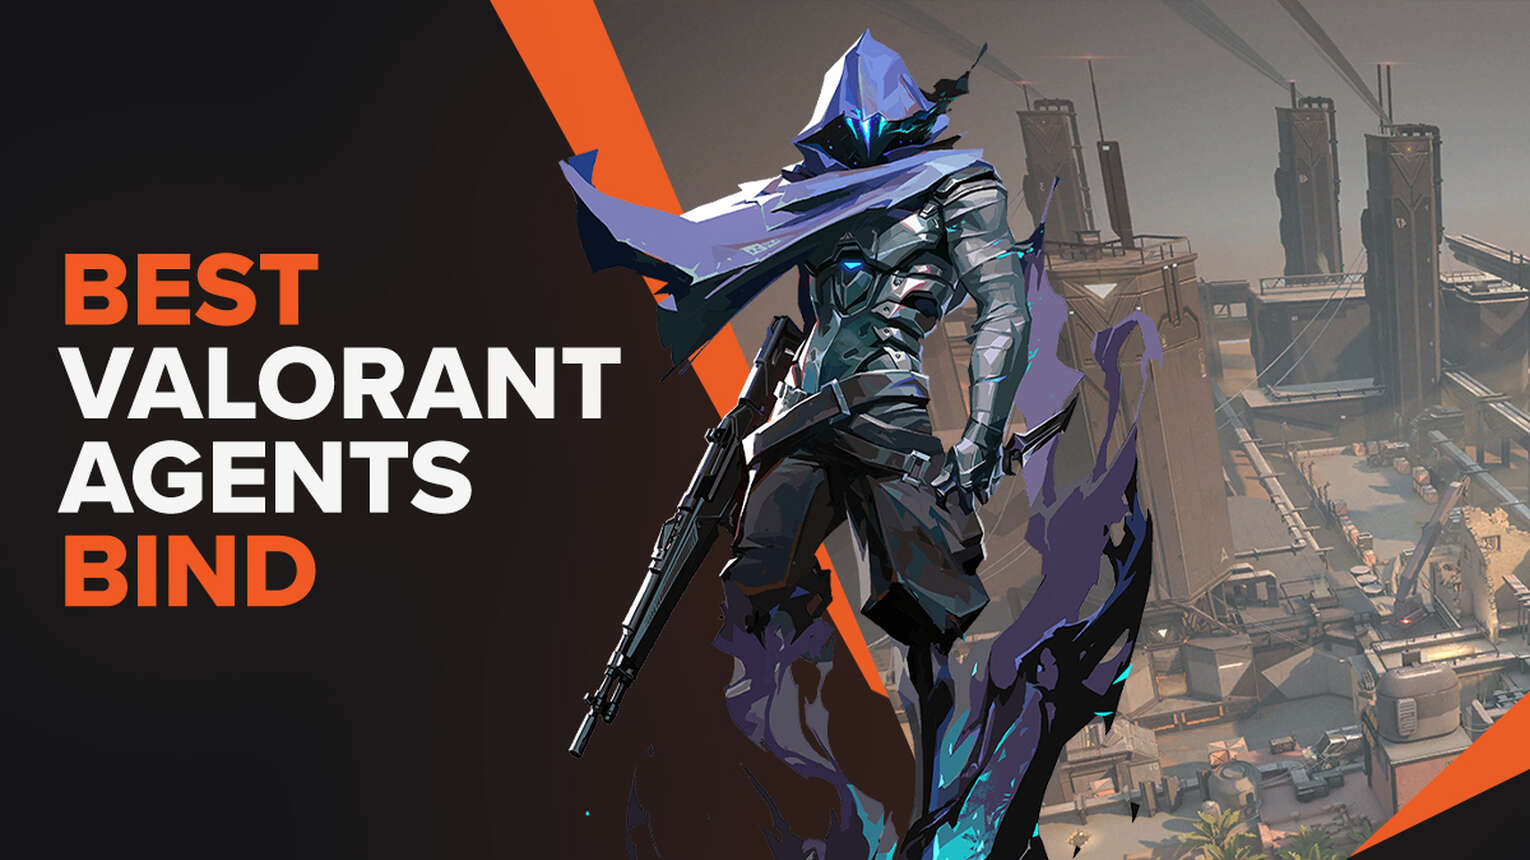 The best Valorant agents for Bind